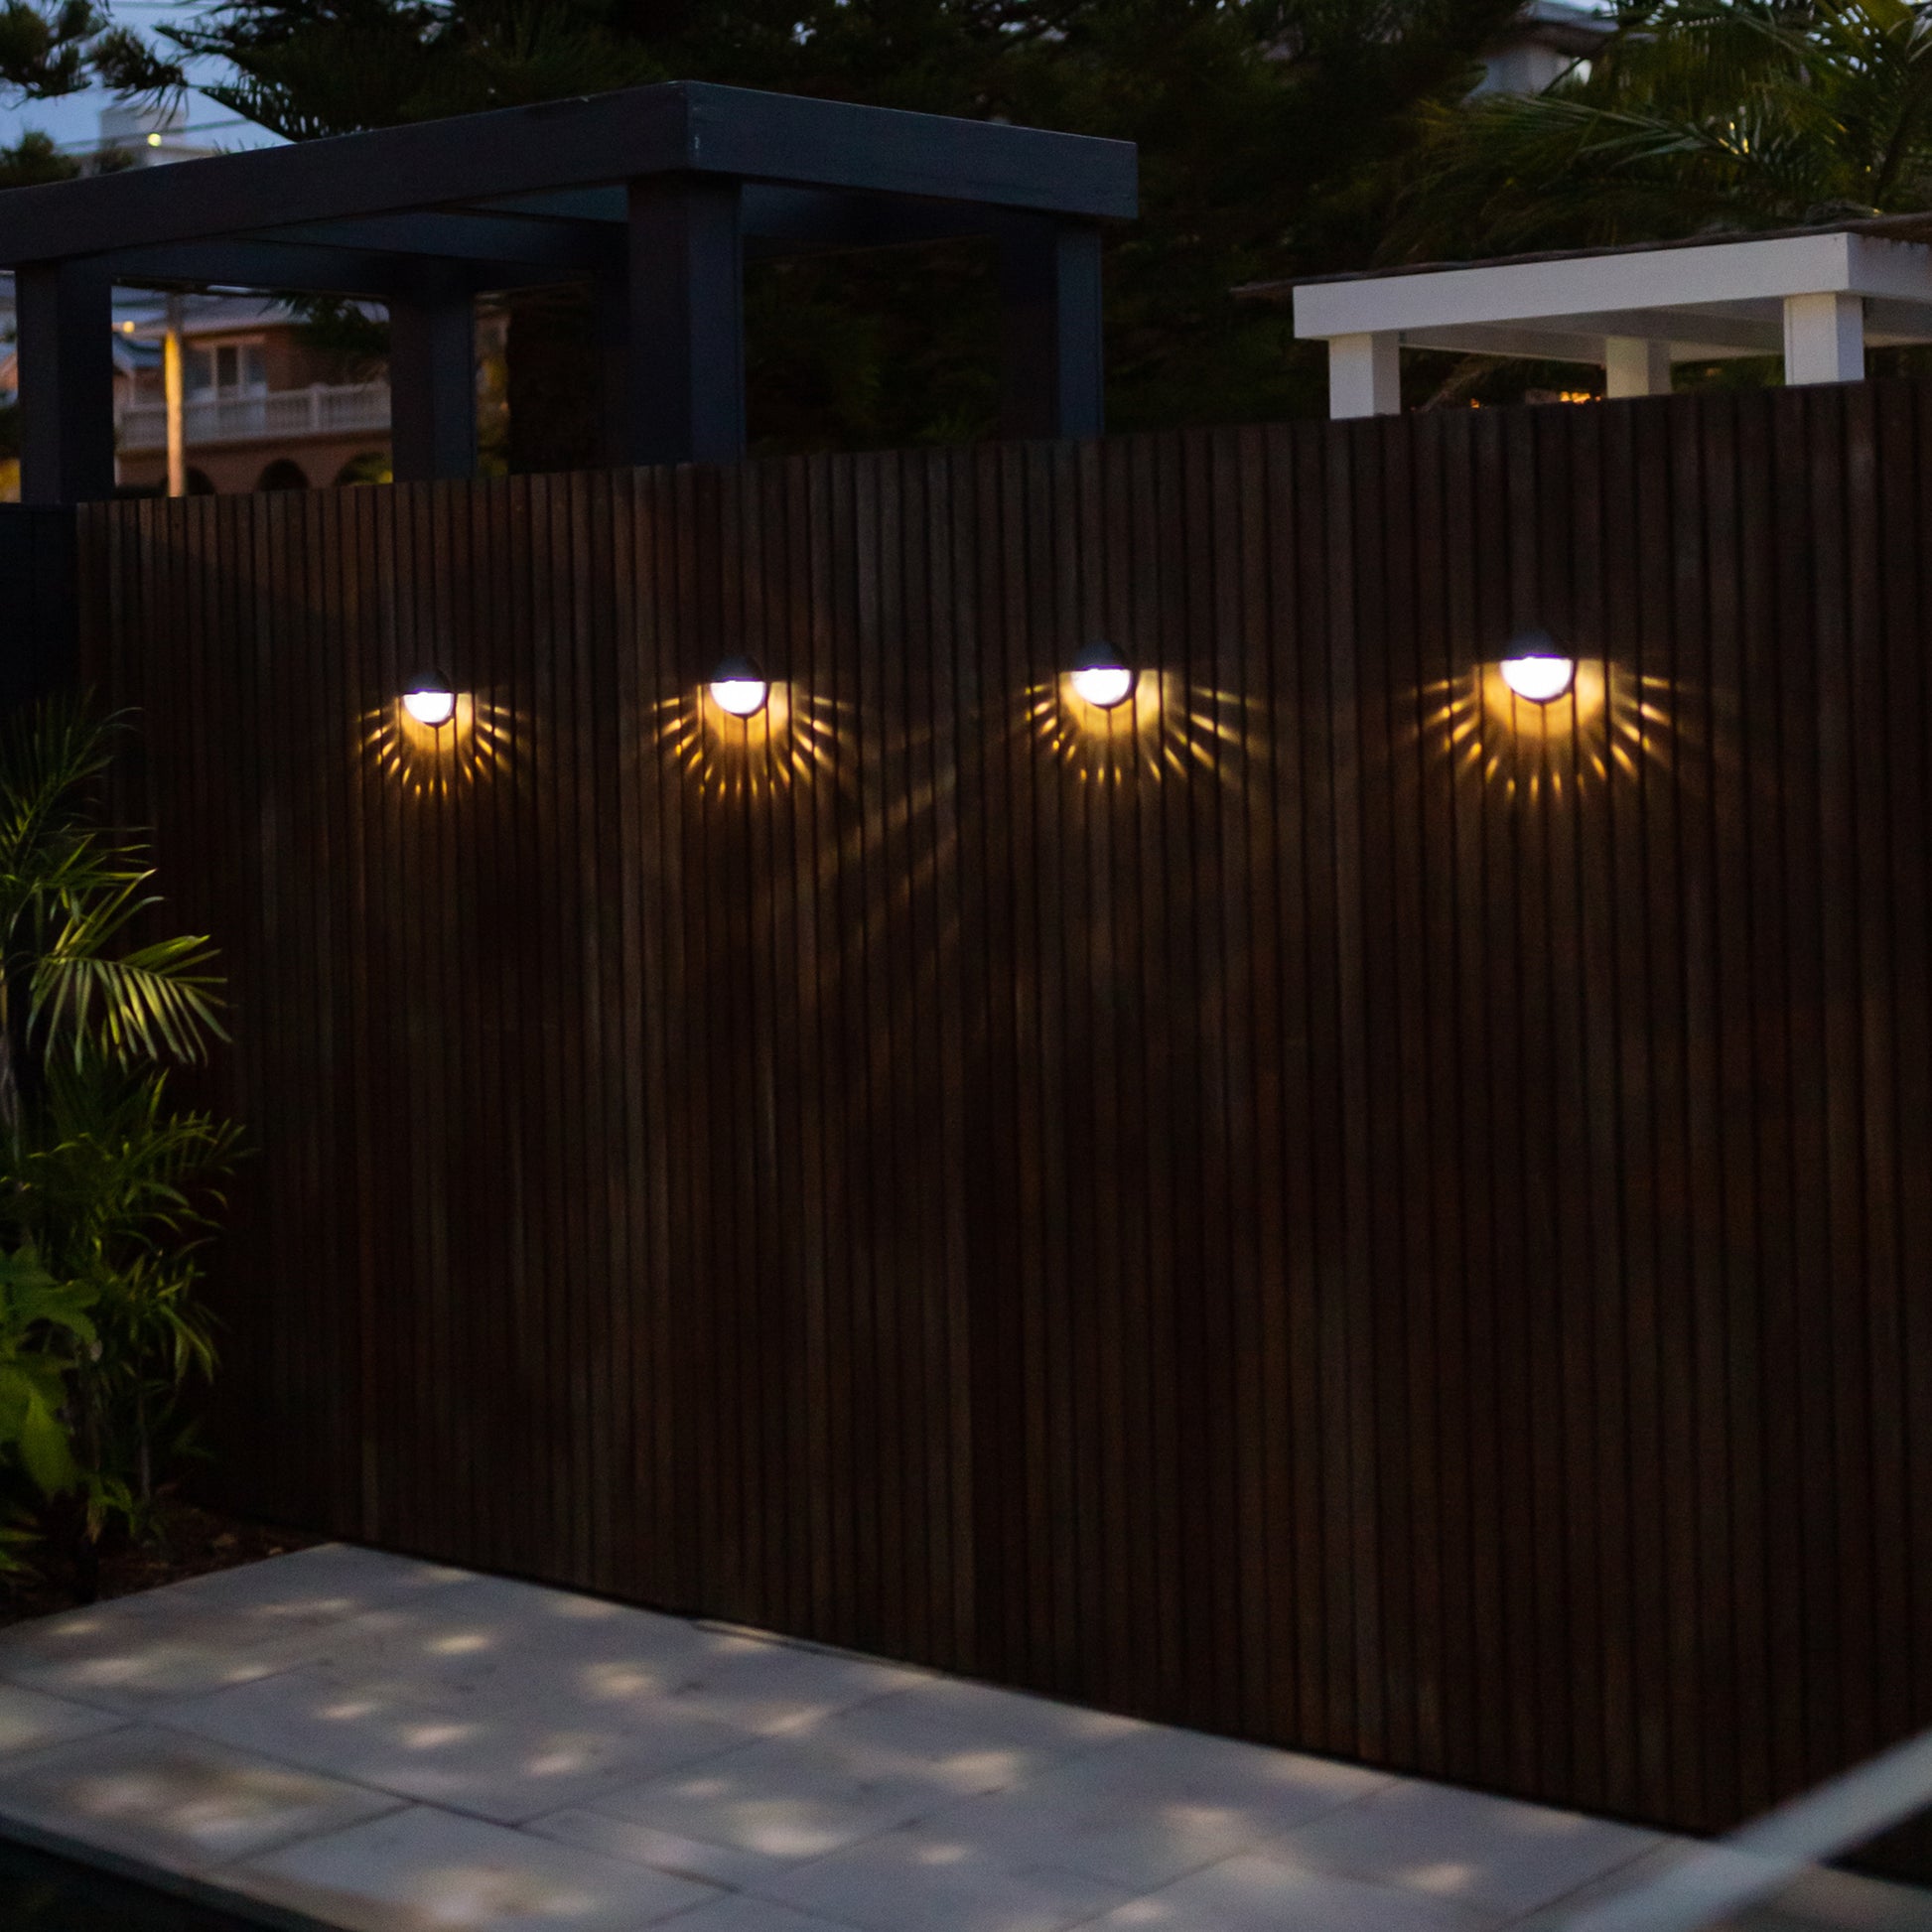 four round solar lights installed on a wooden wall with the lights showing a sun beam pattern beneath them